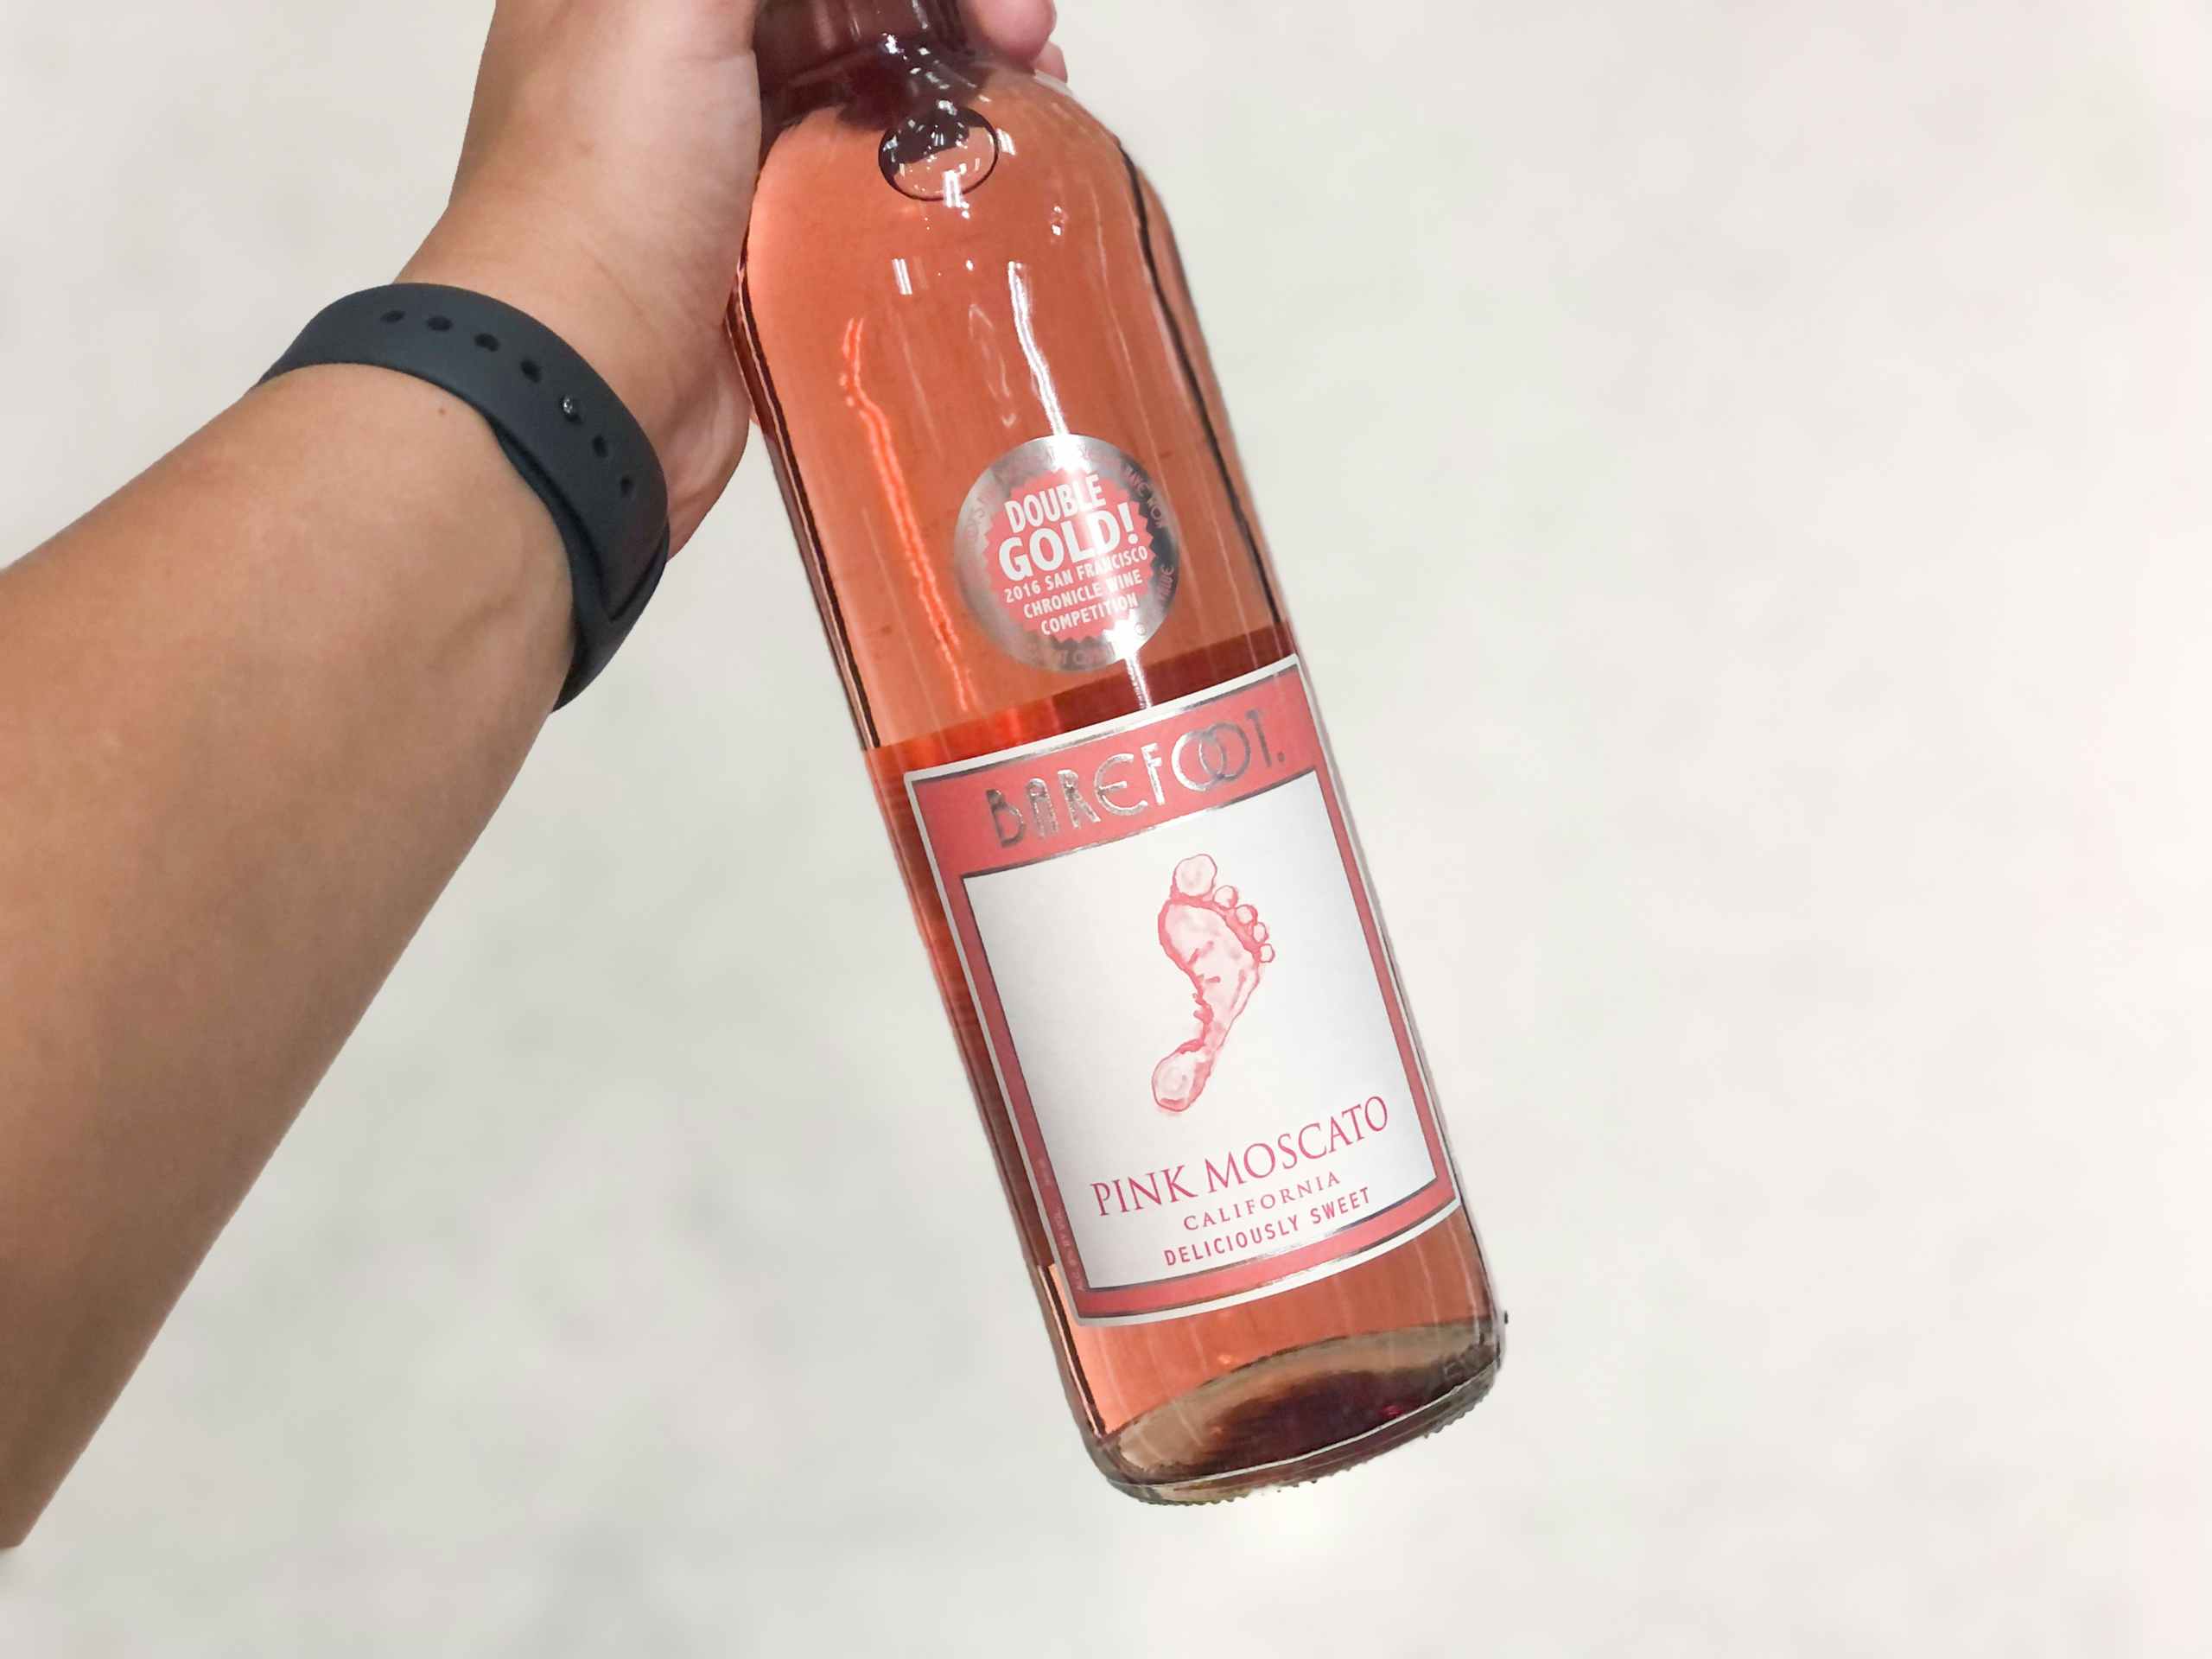 hand holding bottle of Barefoot wine in store aisle